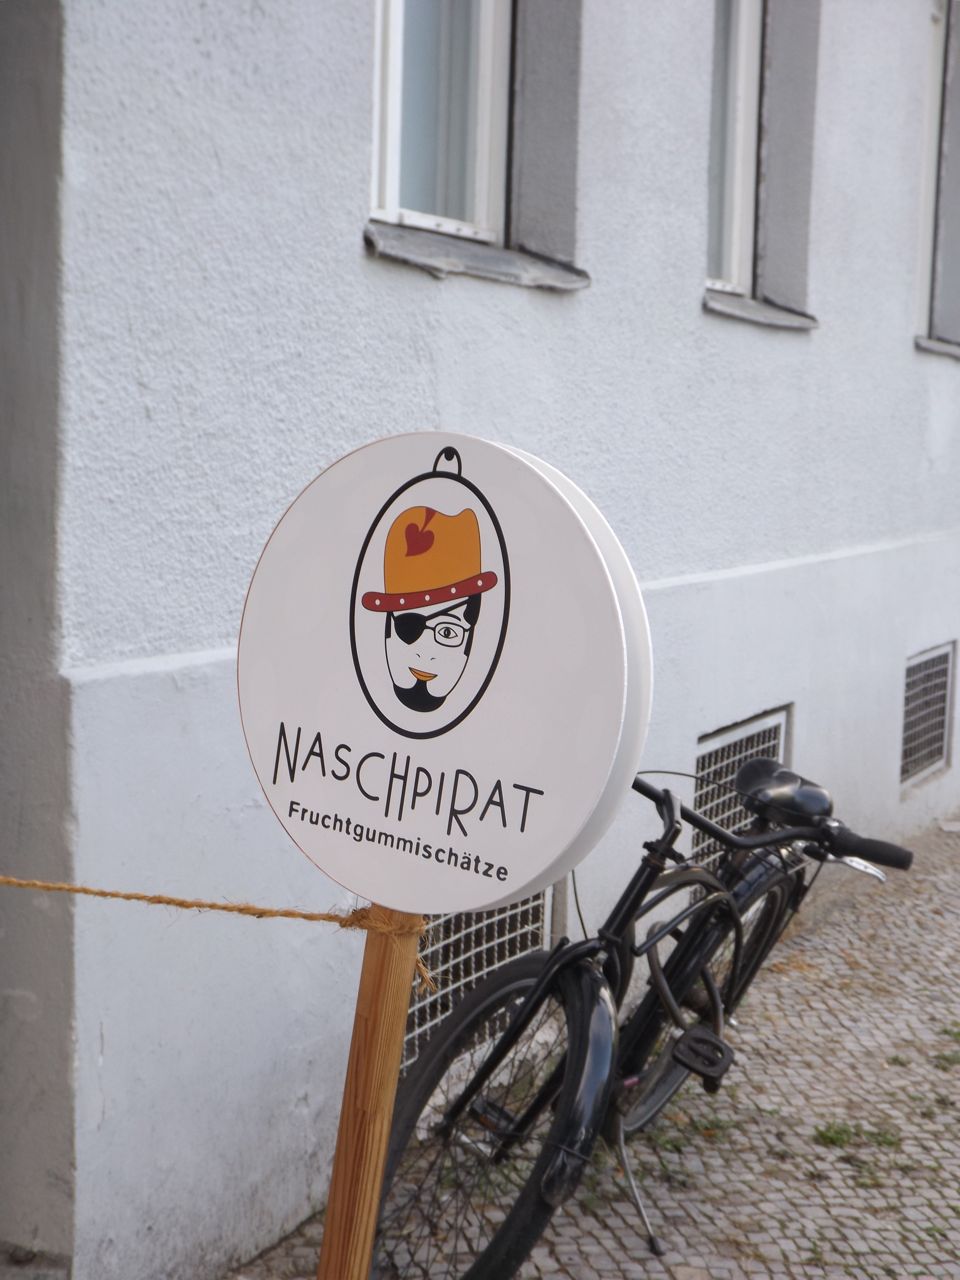 You are currently viewing <!--:en-->“Naschpiraten”A quirky candy Store for the kid in all of us<!--:-->